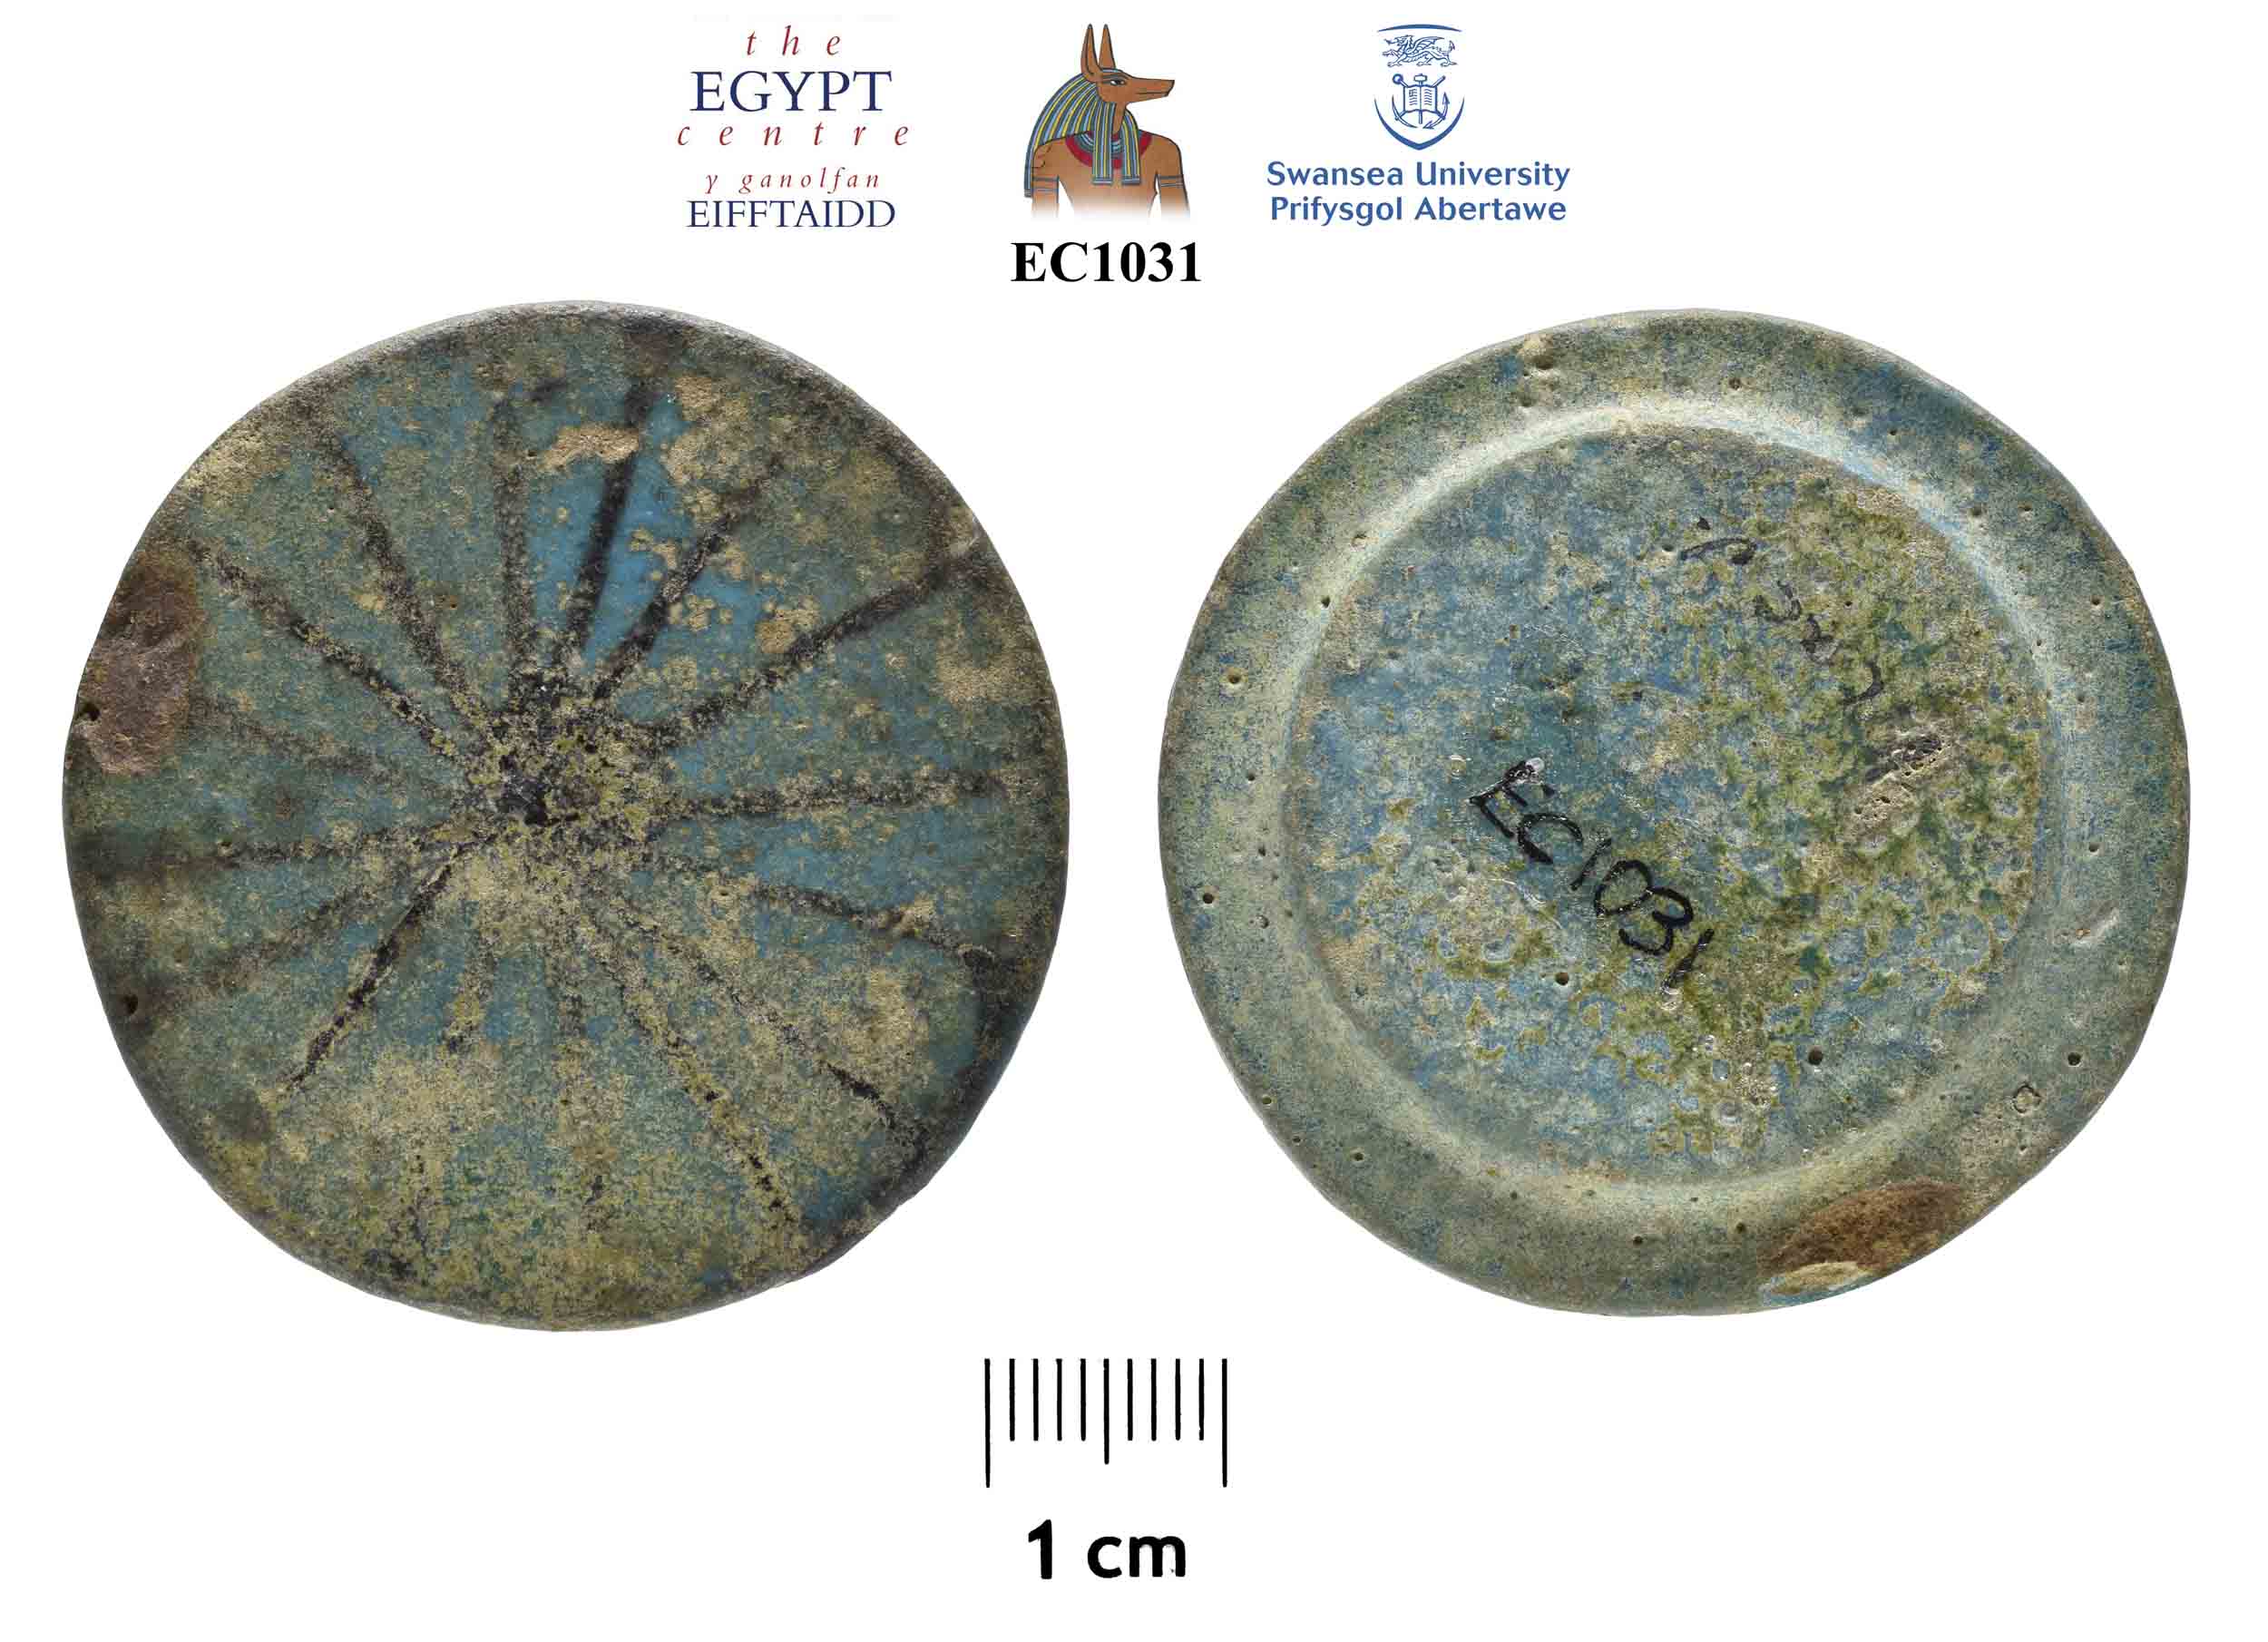 Image for: Lid of a faience vessel